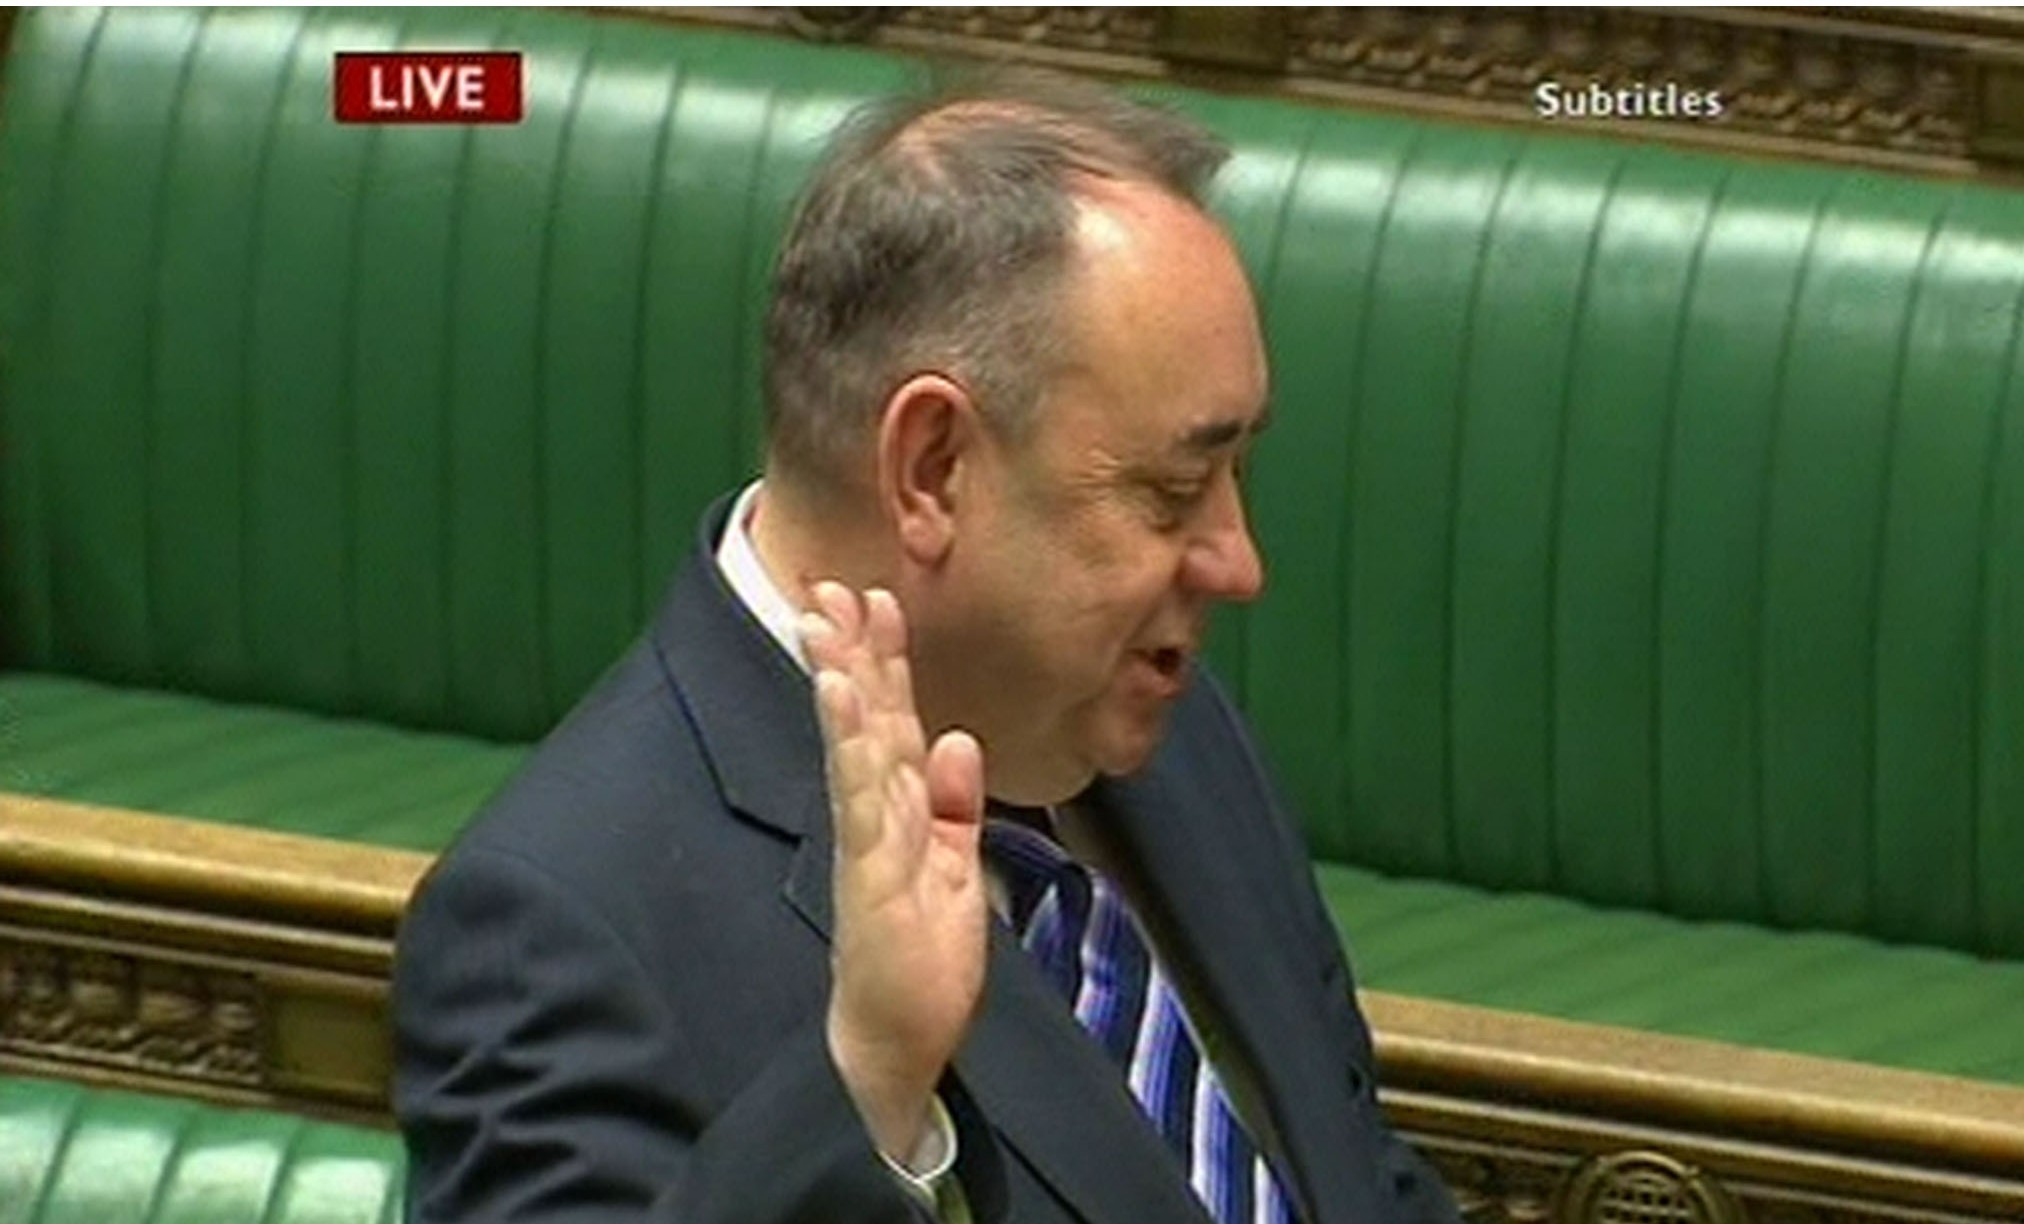 Alex Salmond is sworn in as a MP as he takes his Commons seat.